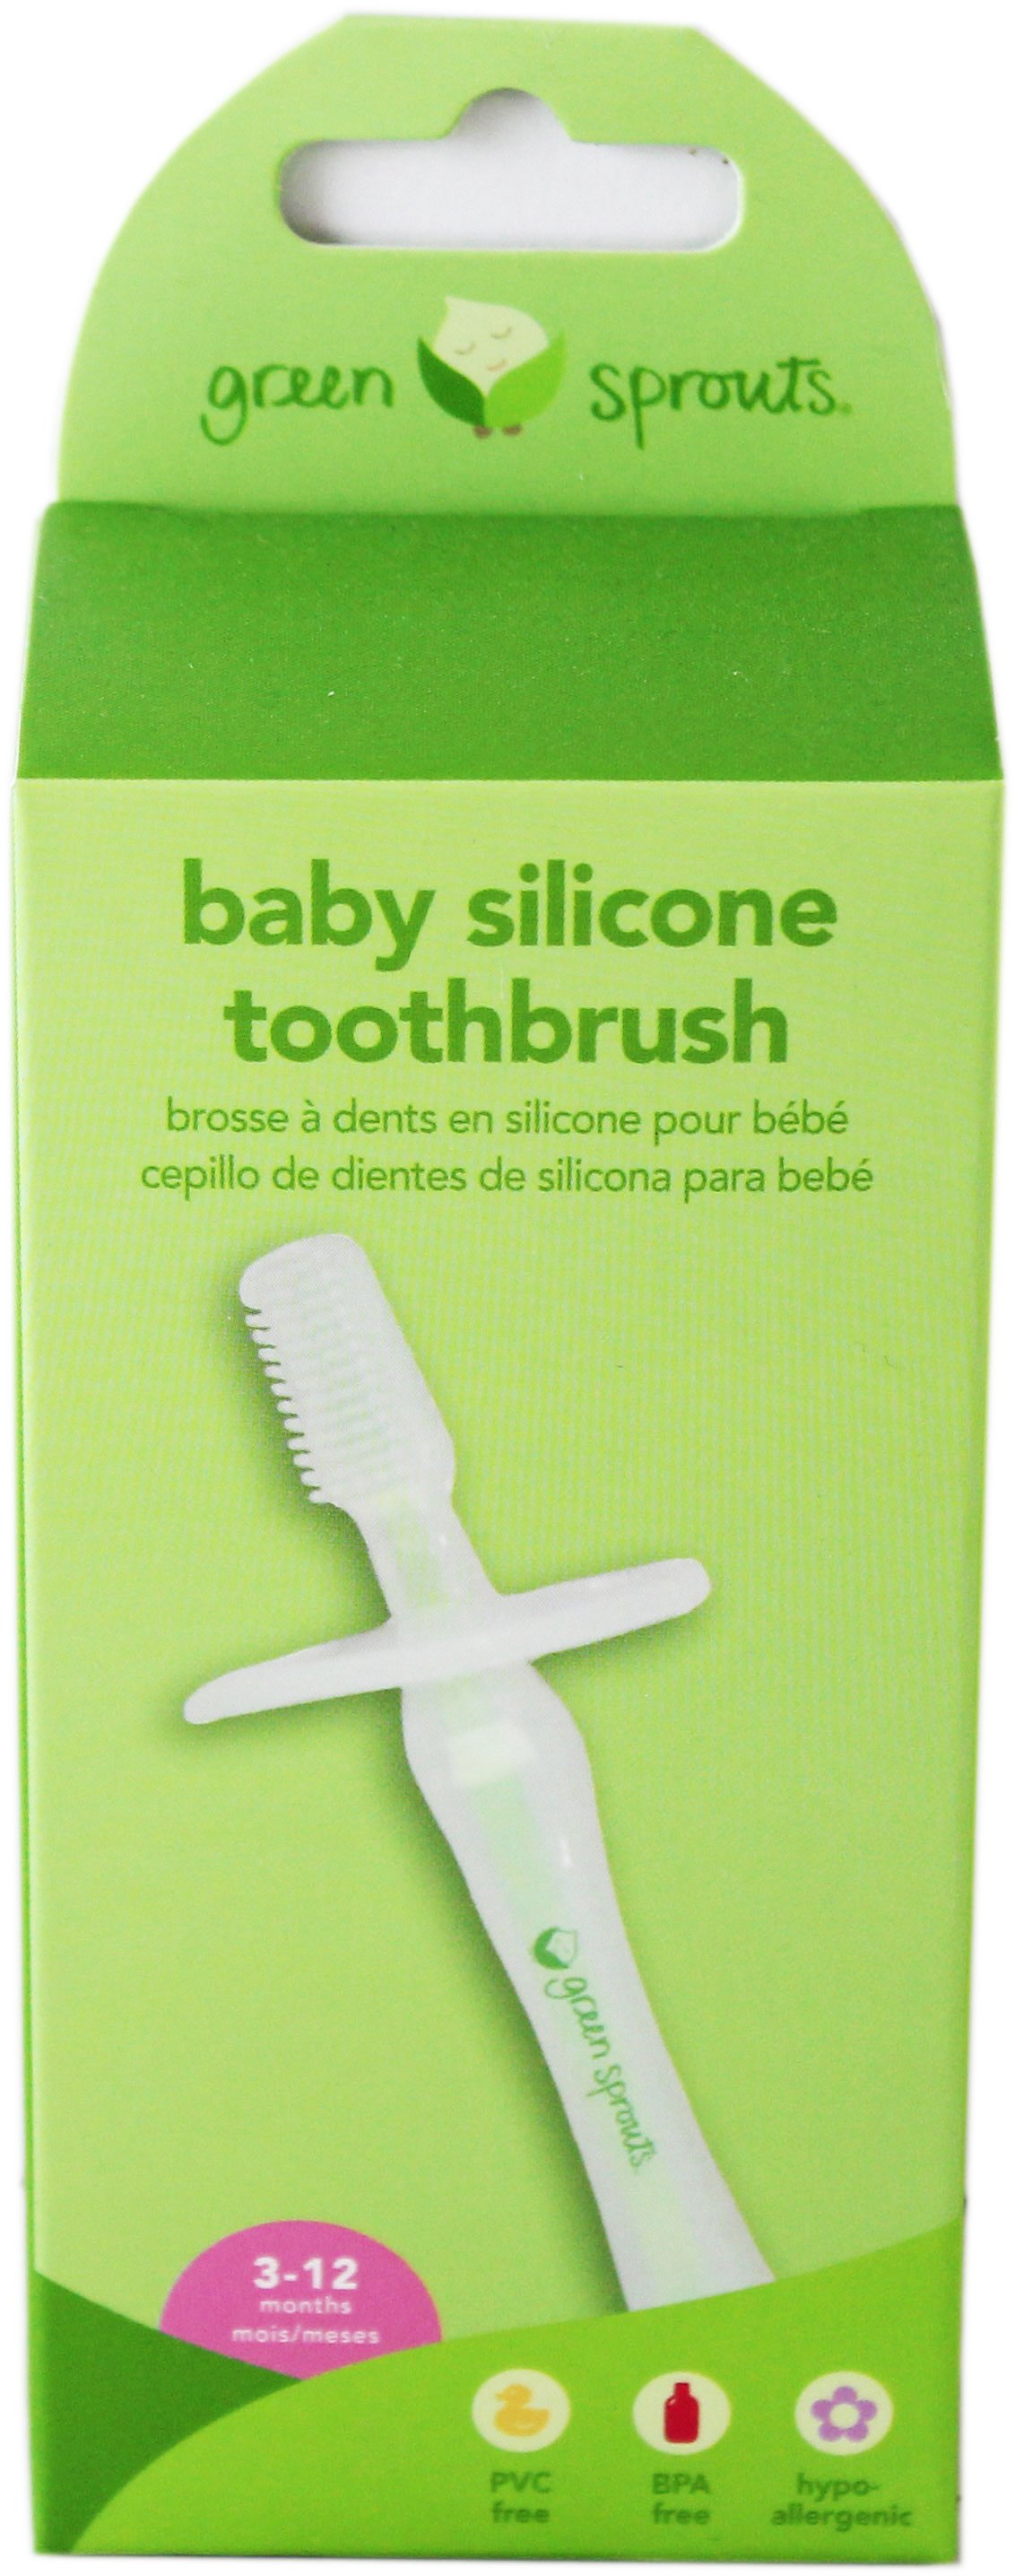 green sprouts baby toothbrush